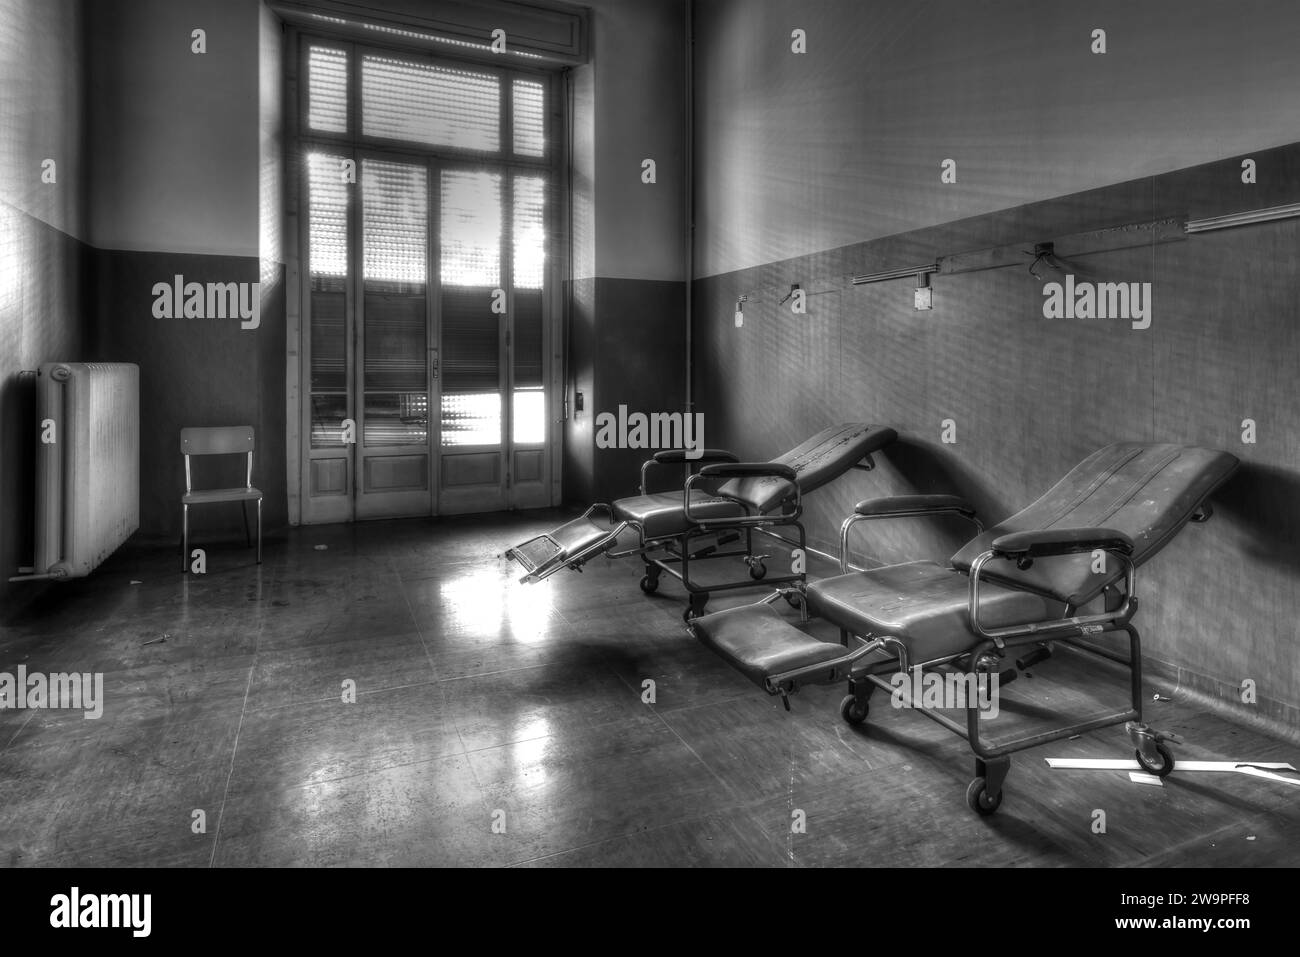 December 10, 2023, Room of an abandoned hospital, with beds and medical equipment Stock Photo